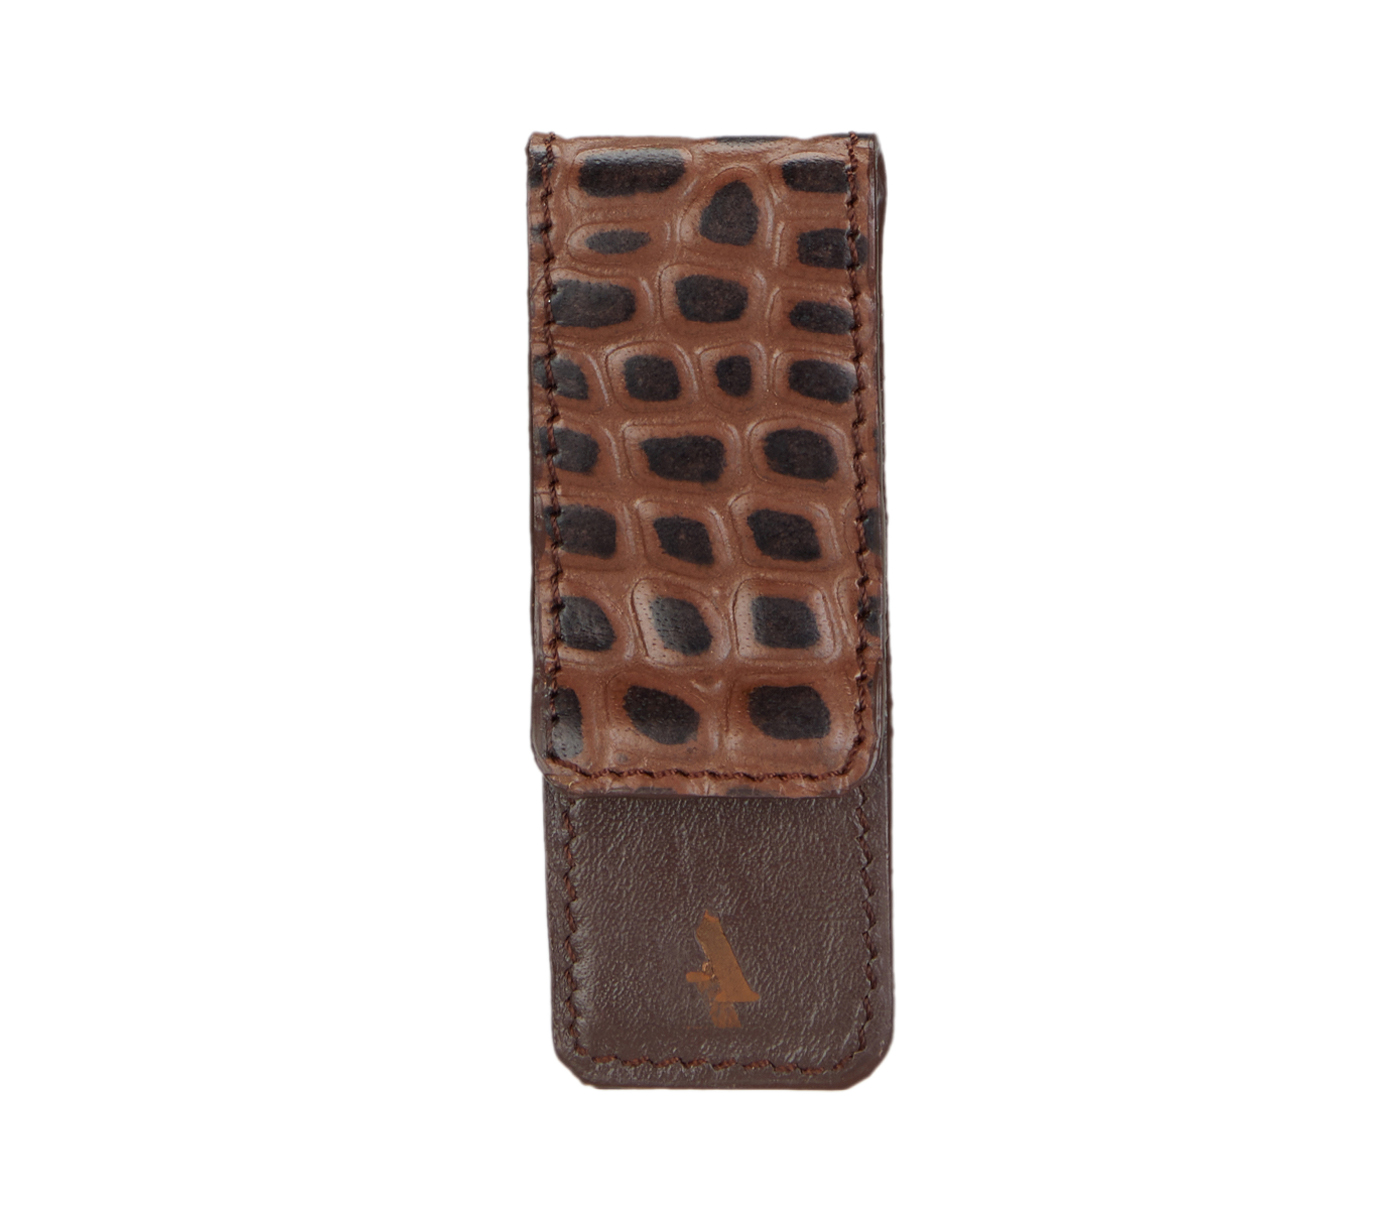  Leather Money Clip(Brown)W336